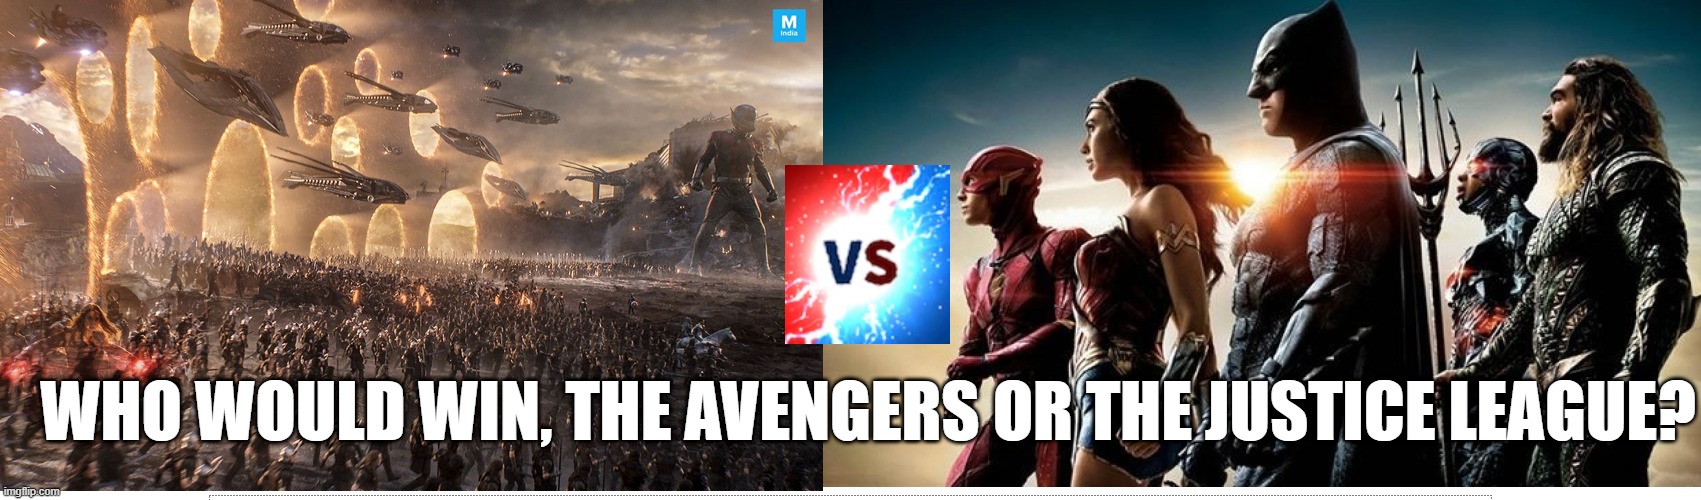 so, what do you think? | WHO WOULD WIN, THE AVENGERS OR THE JUSTICE LEAGUE? | image tagged in memes,avengers,justice league,dceu,mcu,movies | made w/ Imgflip meme maker